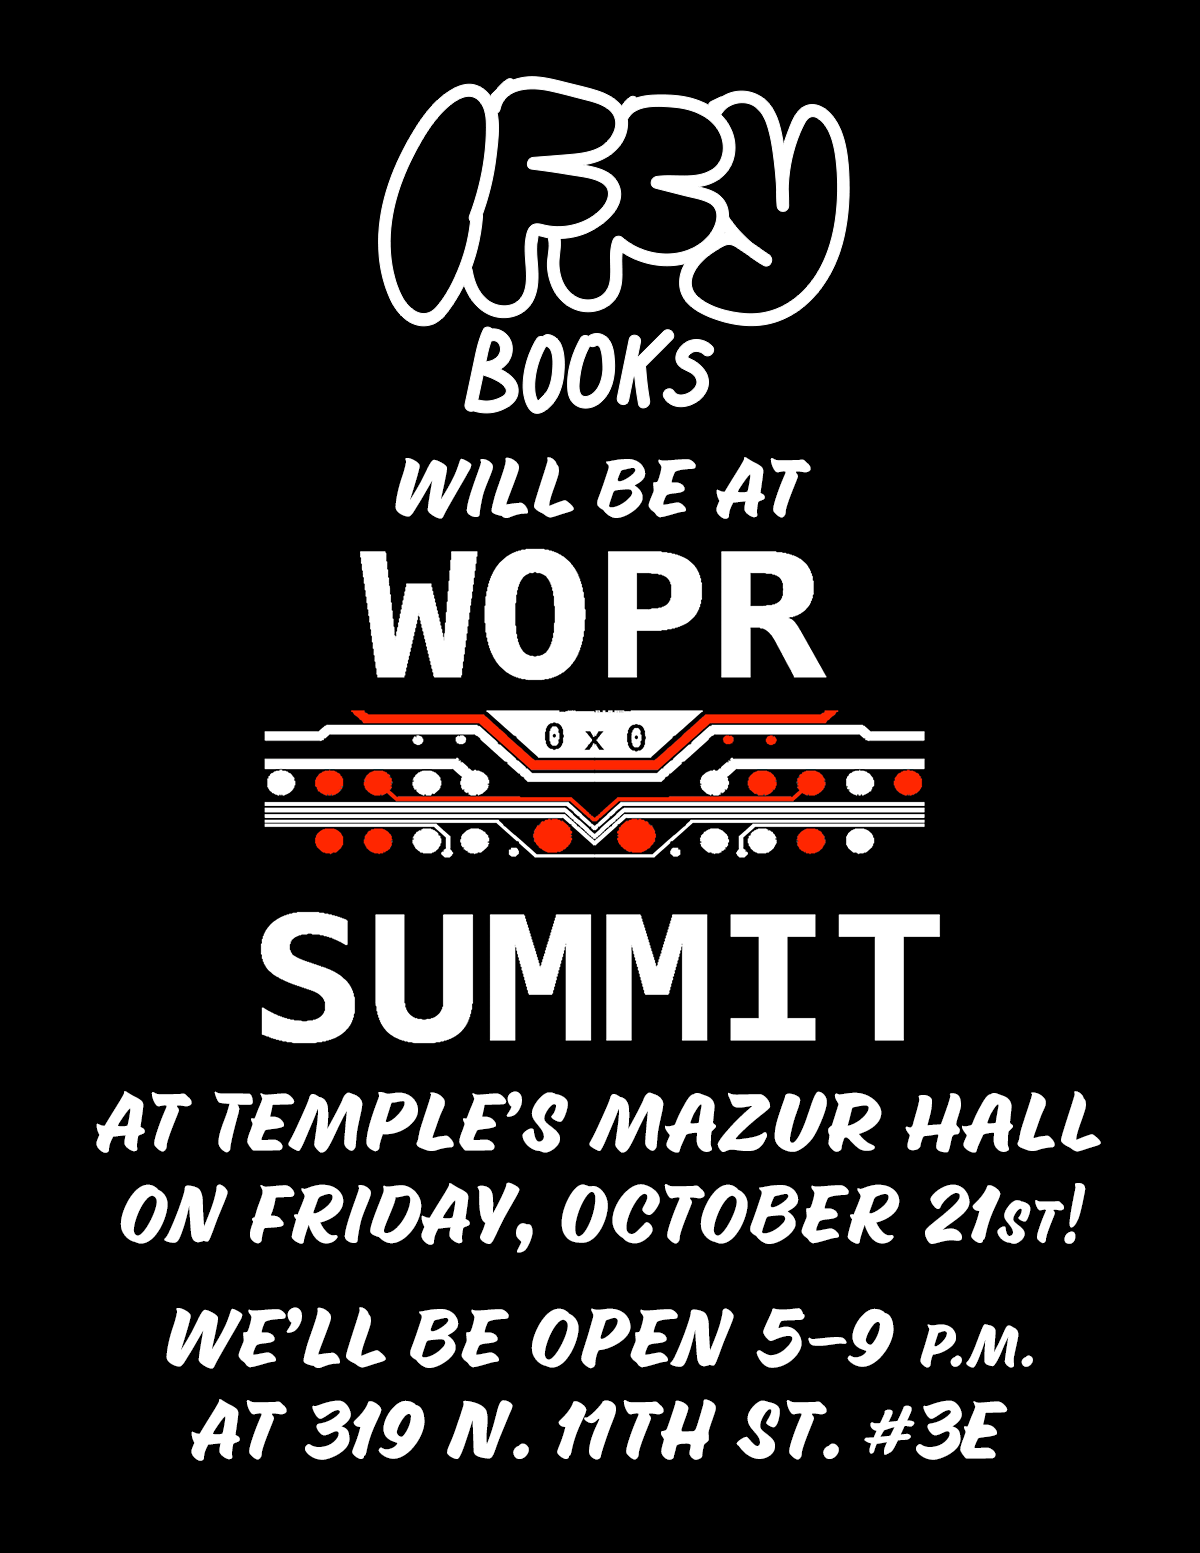 Flyer image with white text on a black background: Iffy Books will be at WOPR SUMMIT at TEMPLE’s MAZUR HALL on Friday, October 21st! We’ll be open 5–9 p.m. at 319 N. 11th St. #3E